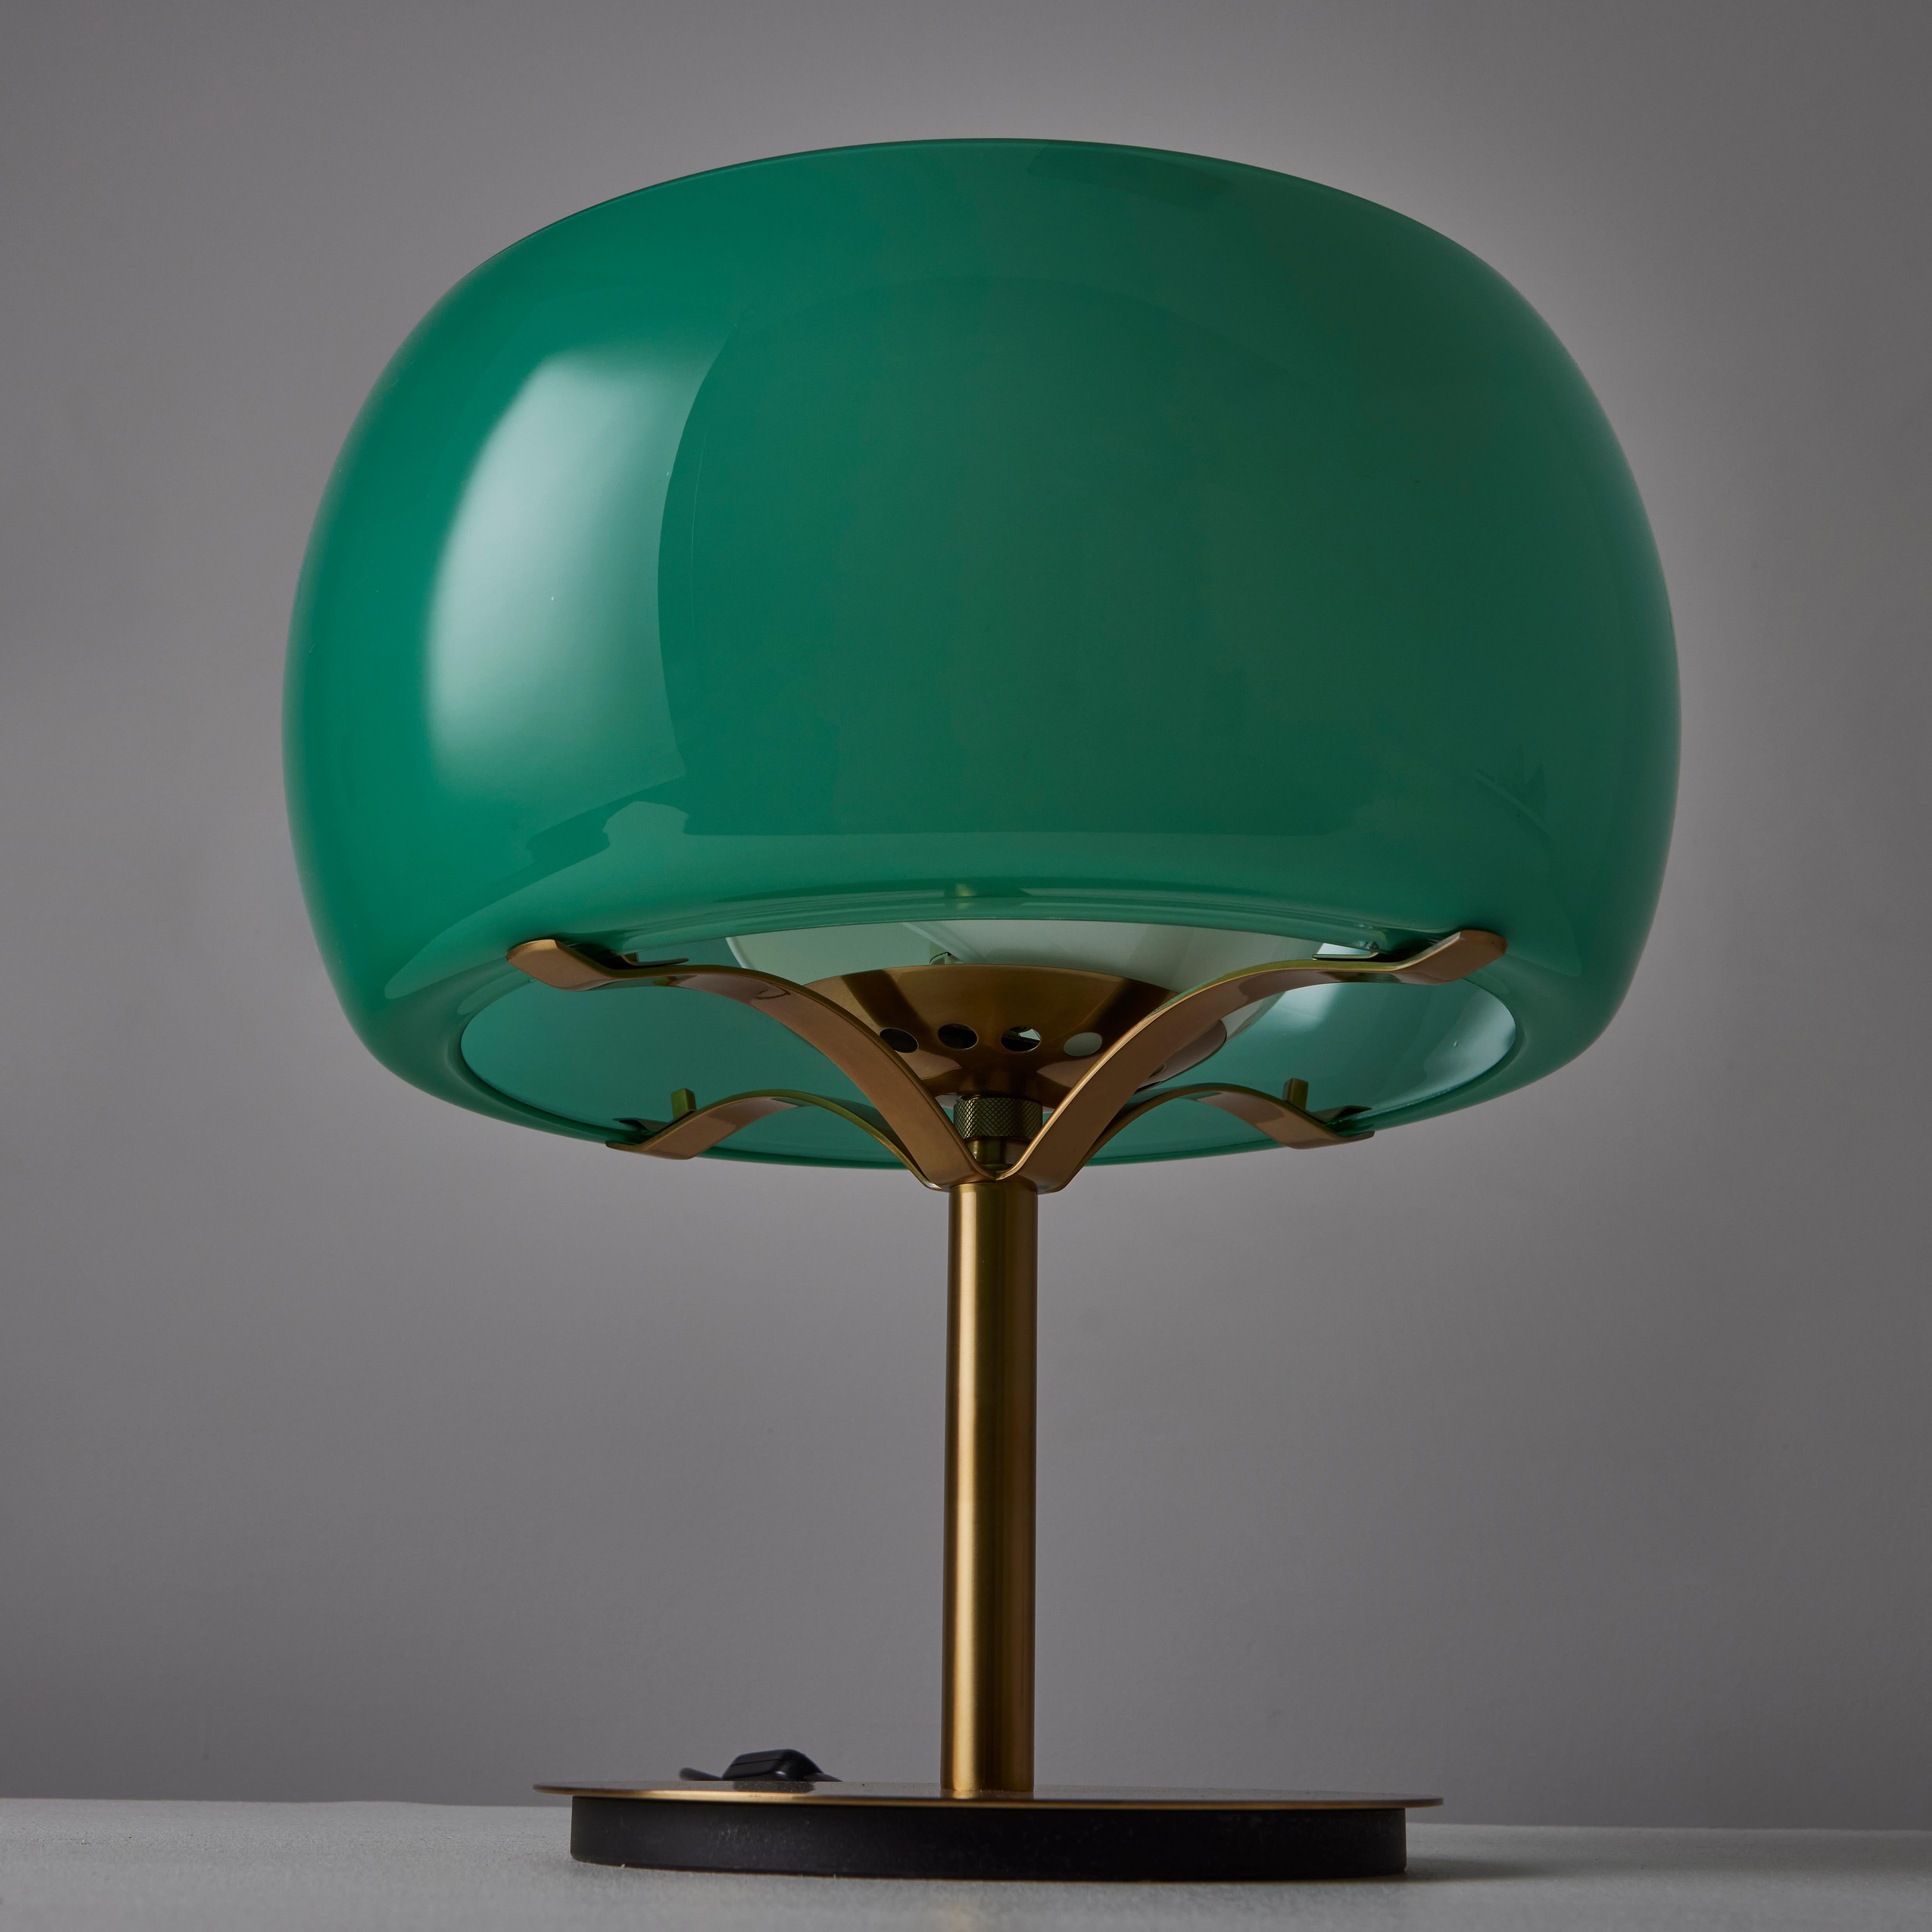 Polished Rare 'Erse' Table Lamp by Vico Magistretti for Artemide For Sale